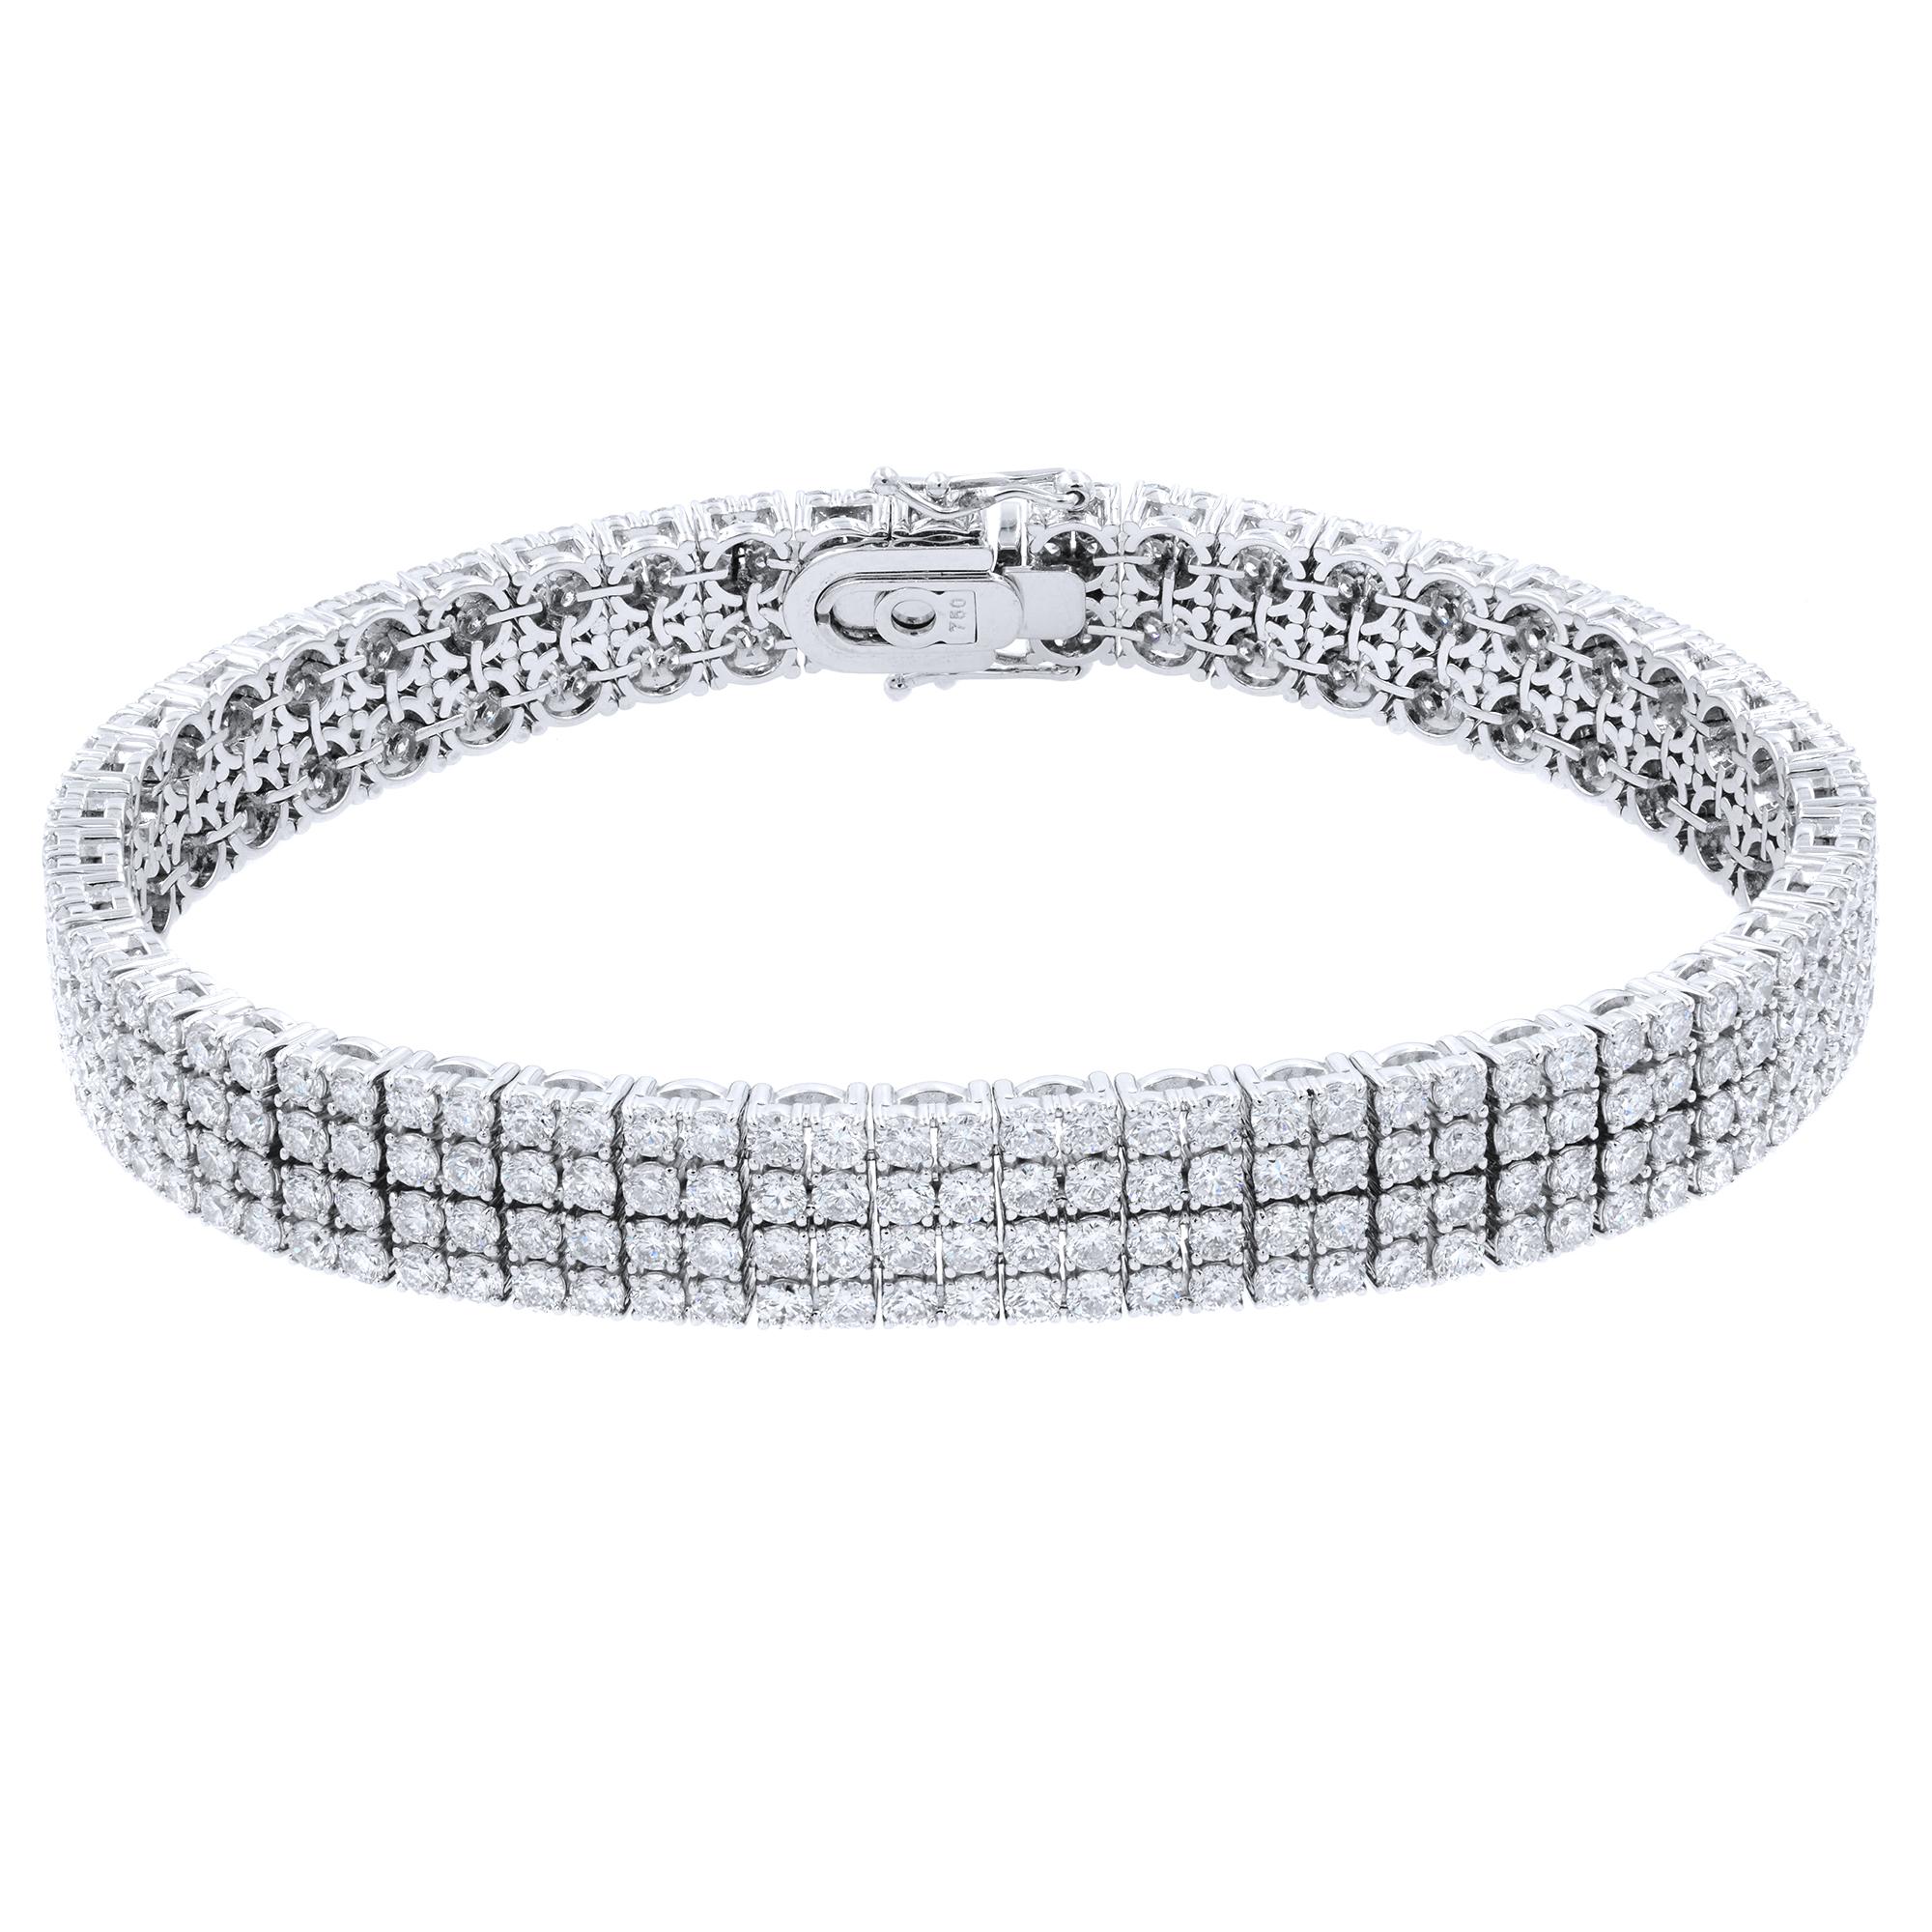 Four row brilliant white diamonds bracelet. A four row of brilliant white diamonds are the centerpiece of this 18k white gold bracelet. Handcrafted with over 5 carats of round diamonds, this exclusive will steal your heart. 
Carat Weight: